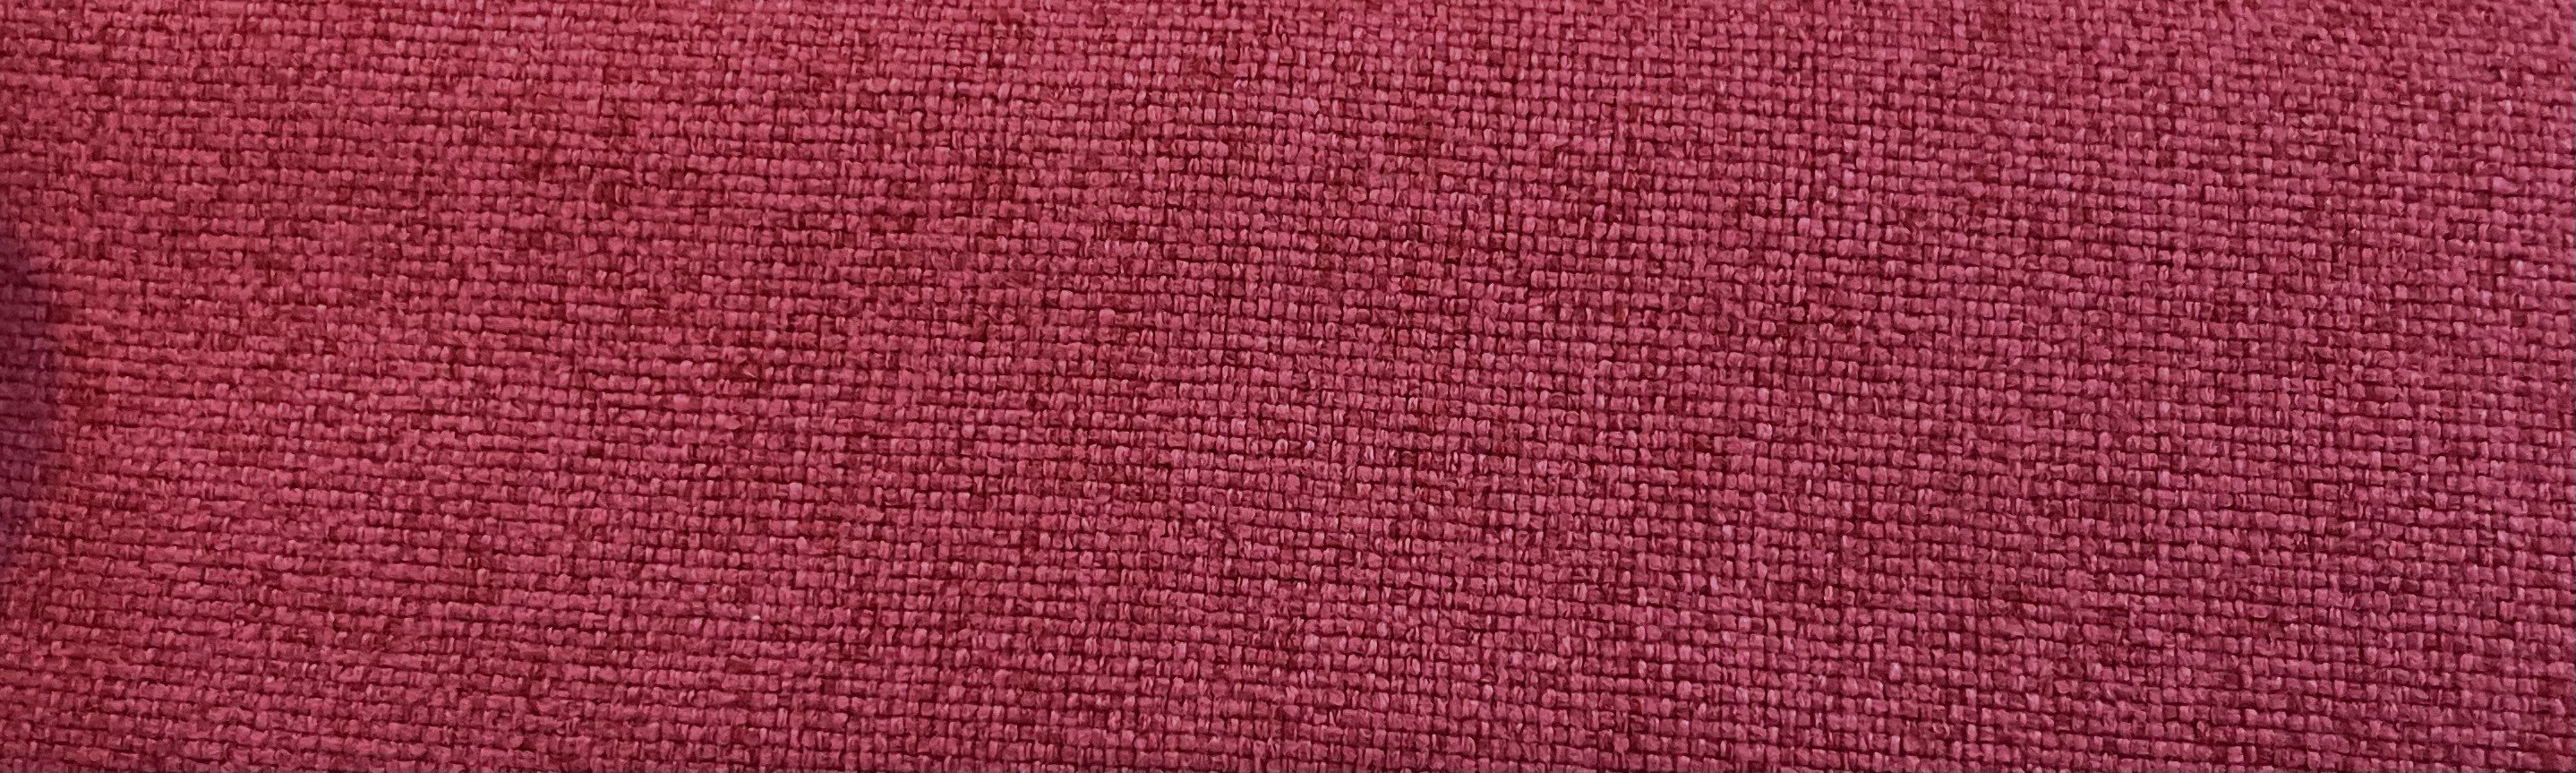 Red fabric - JD378-29 